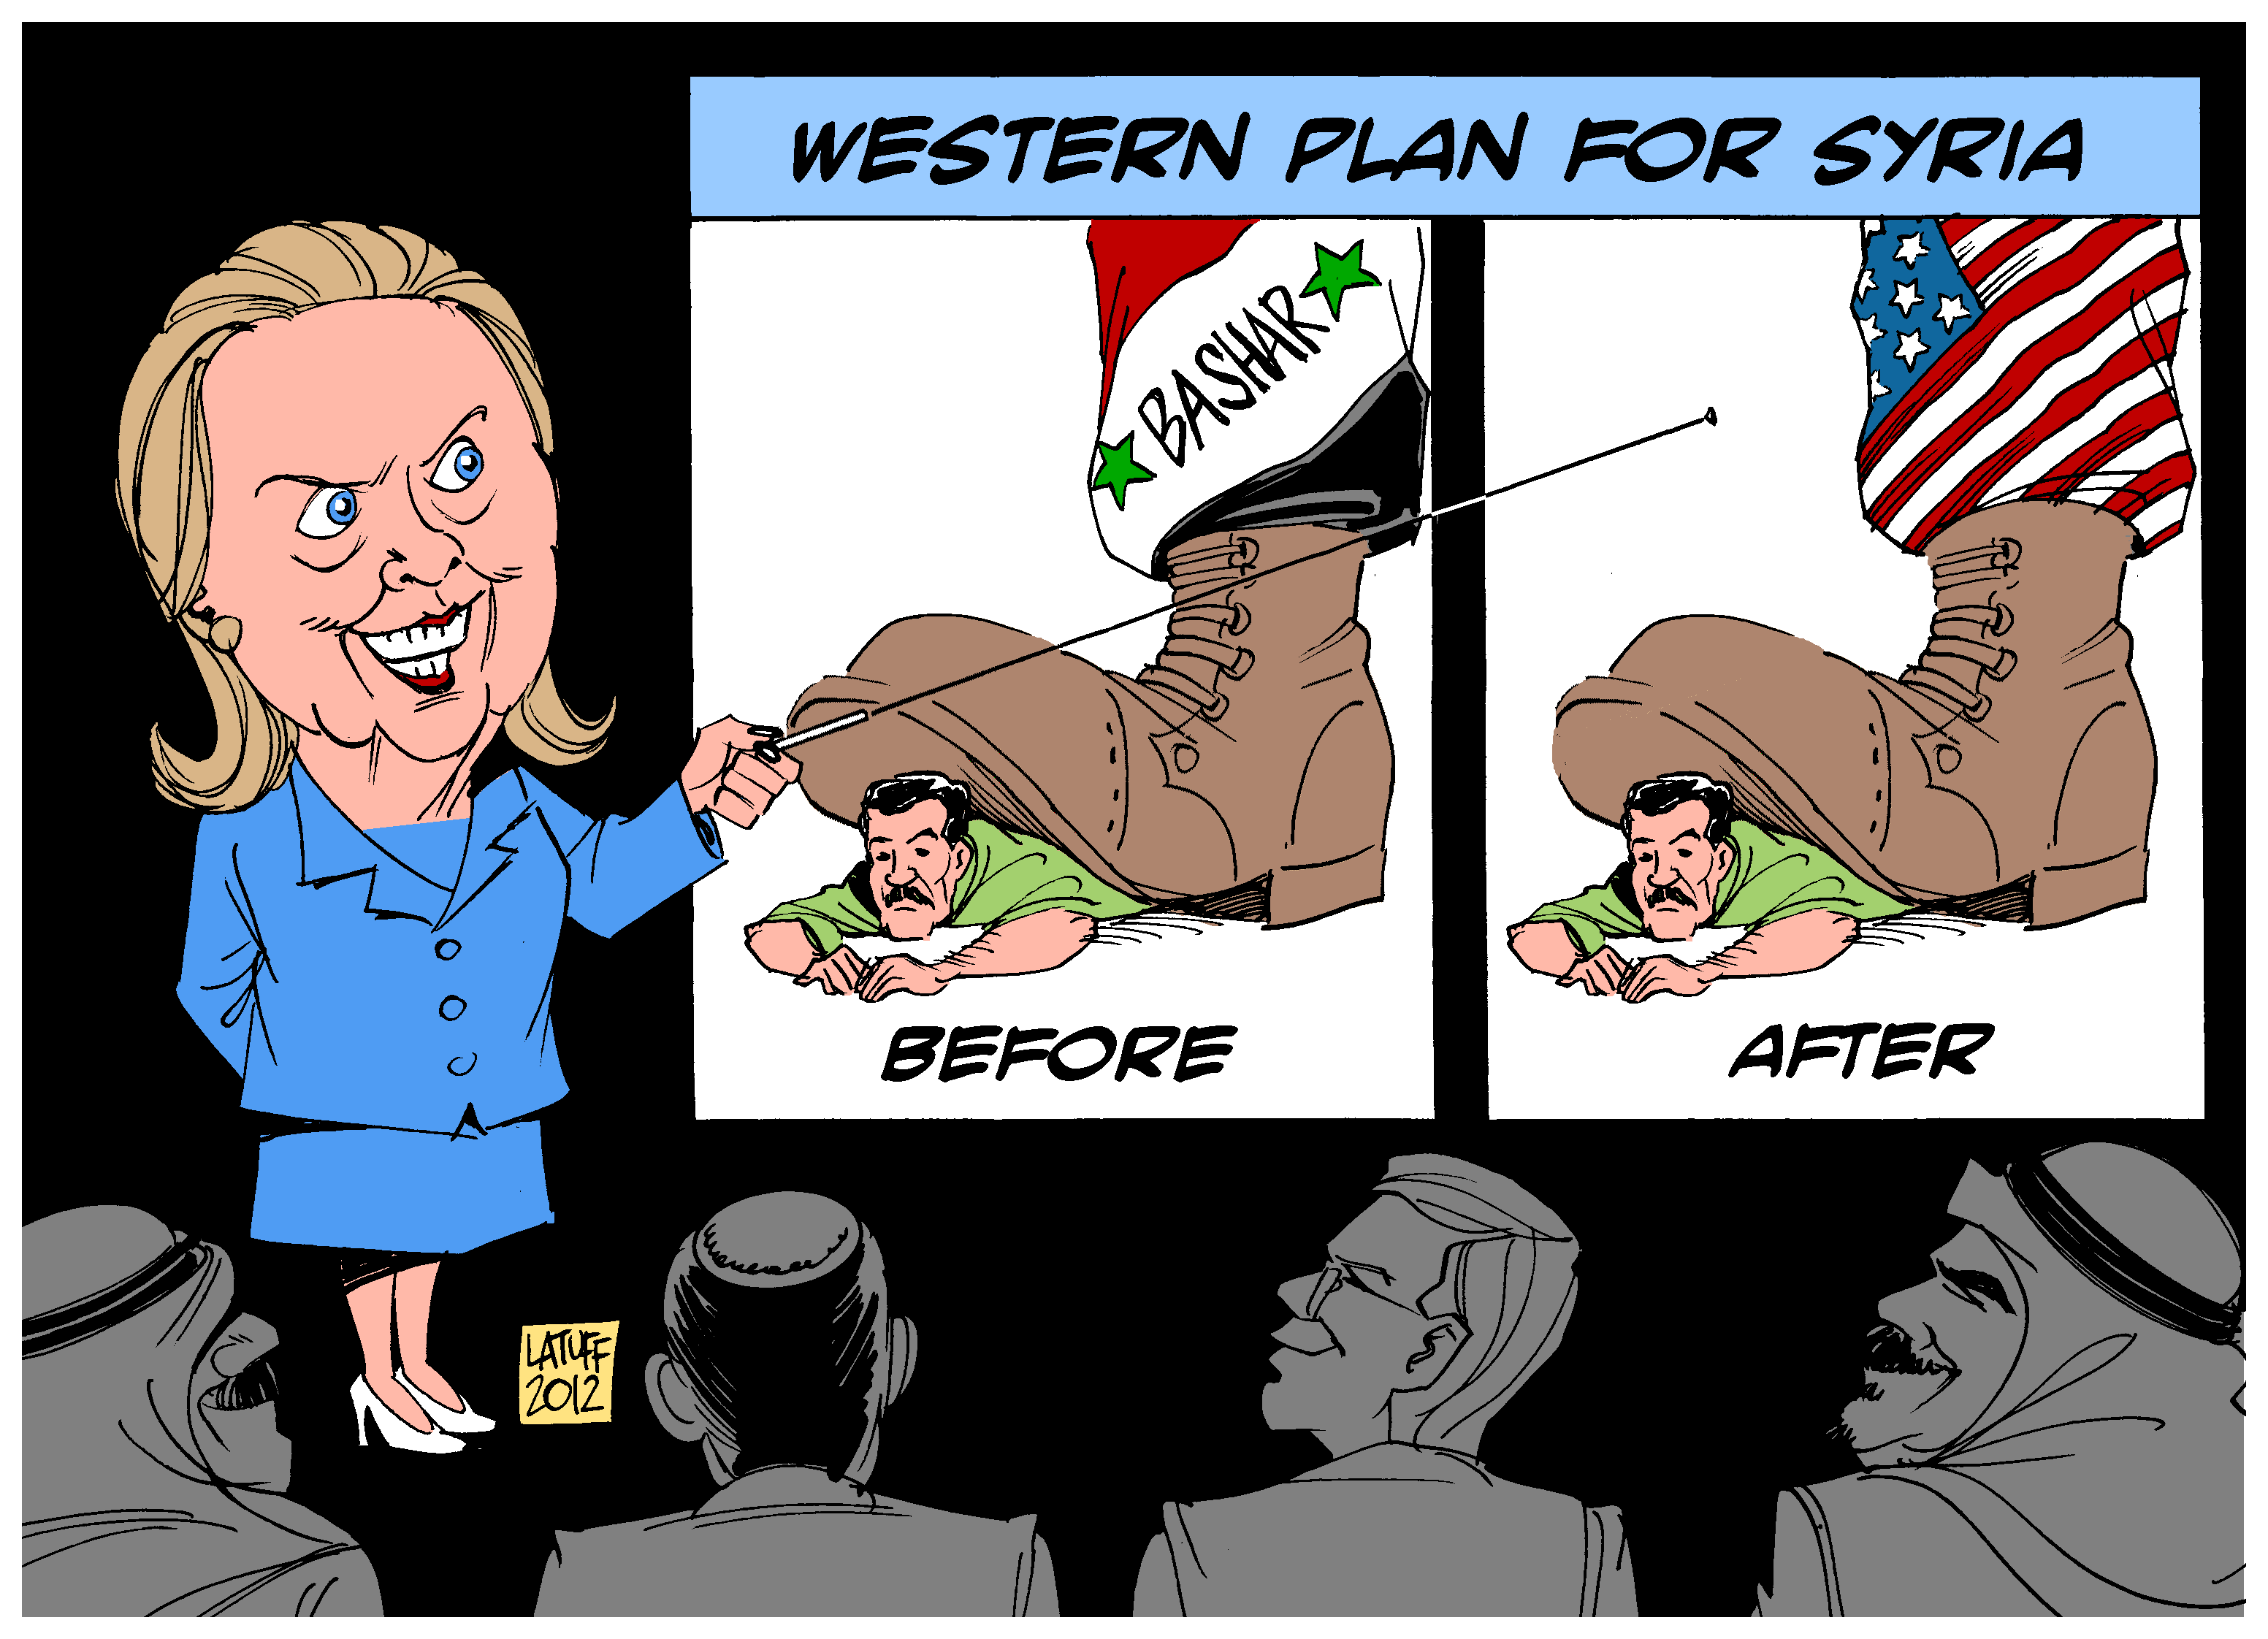 Western plan for Syria (caricature)